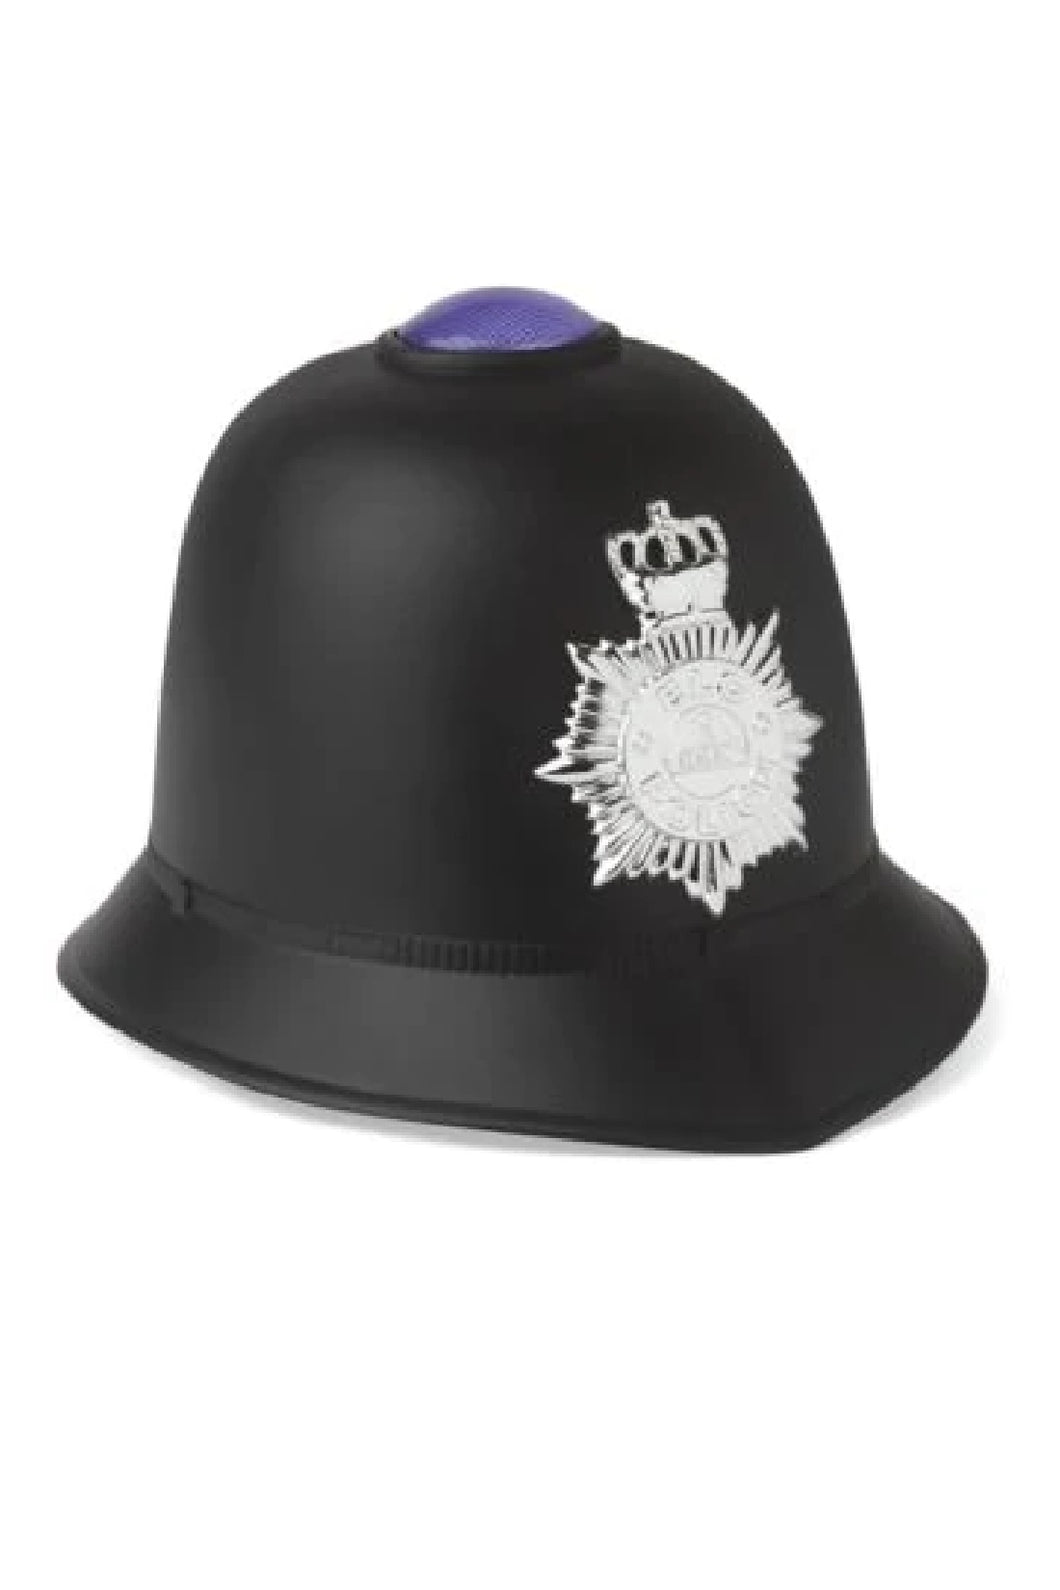 Early Learning Centre Policemans Helmet 1